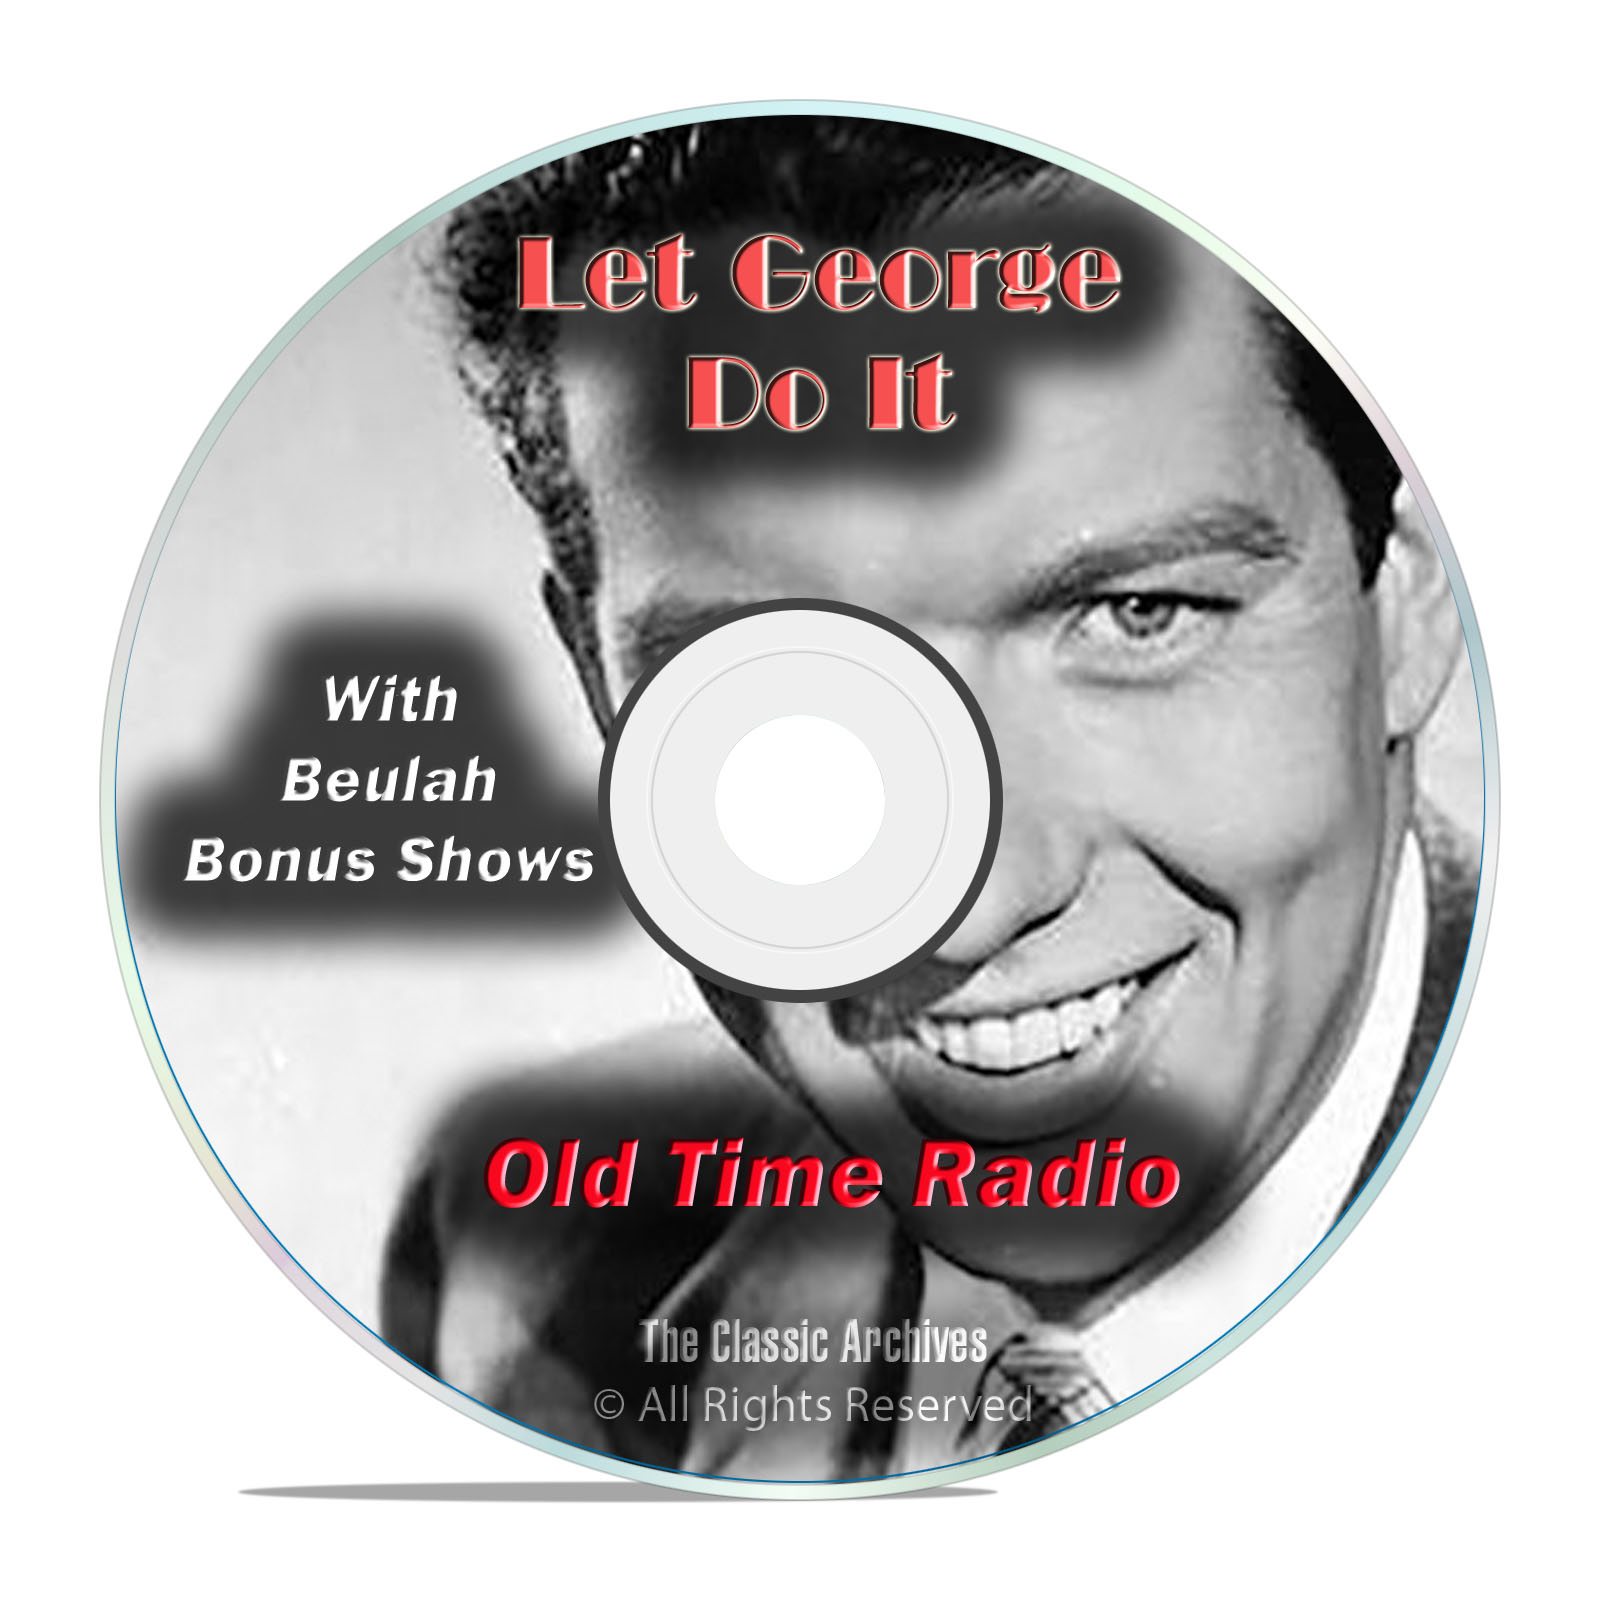 Let George Do It, 713 Classic Old Time Radio Drama Shows, OTR mp3 DVD